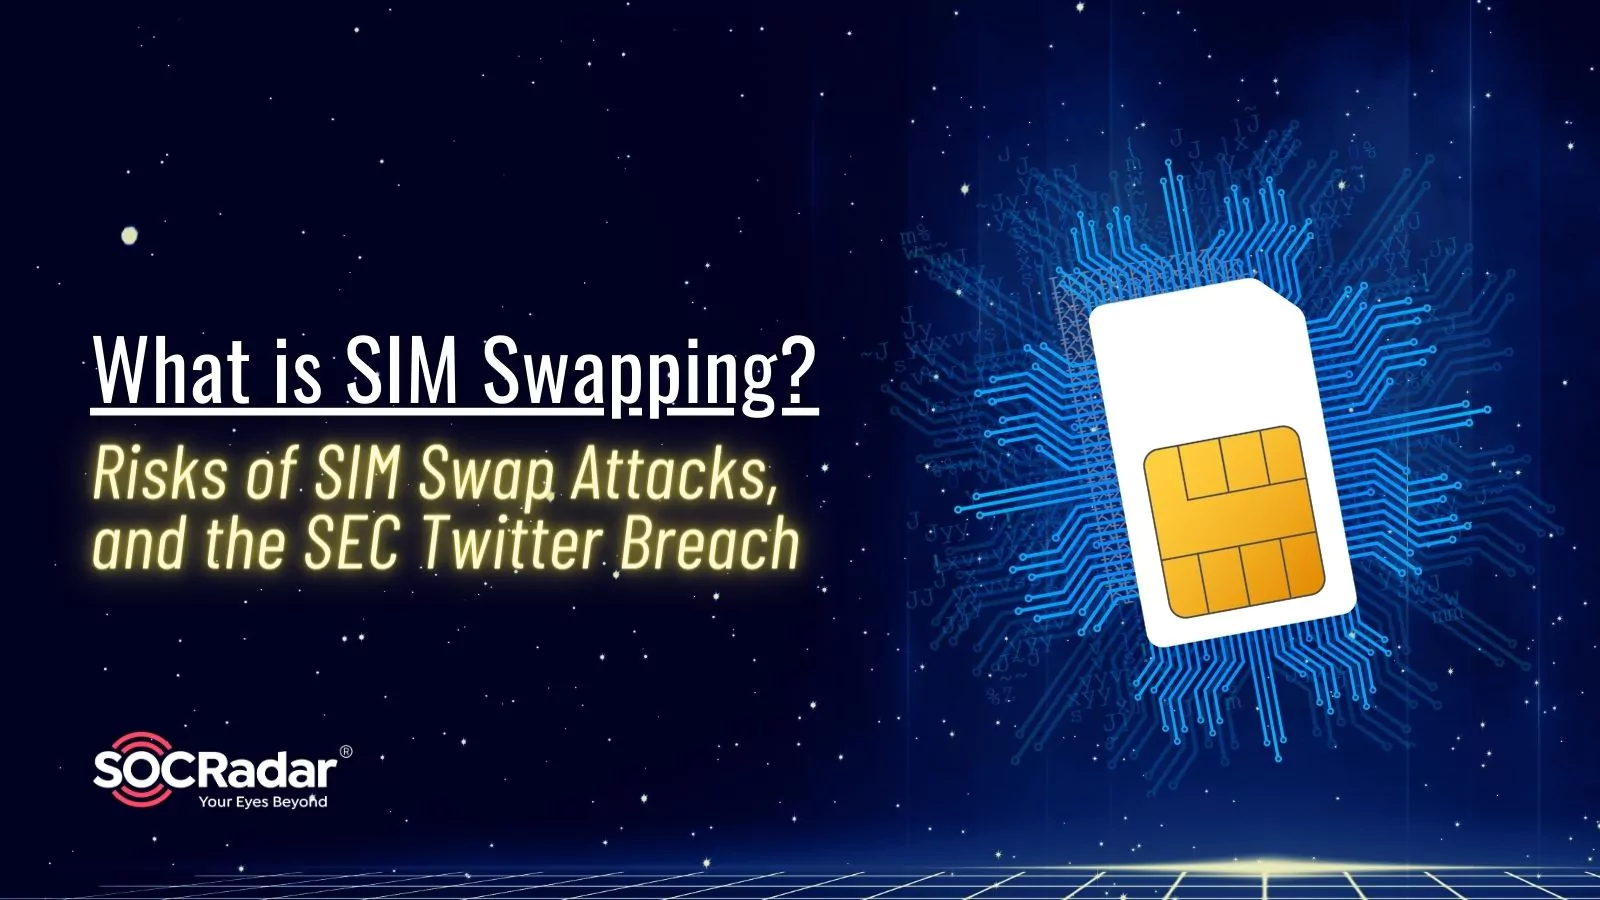 SOCRadar® Cyber Intelligence Inc. | What is SIM Swapping?